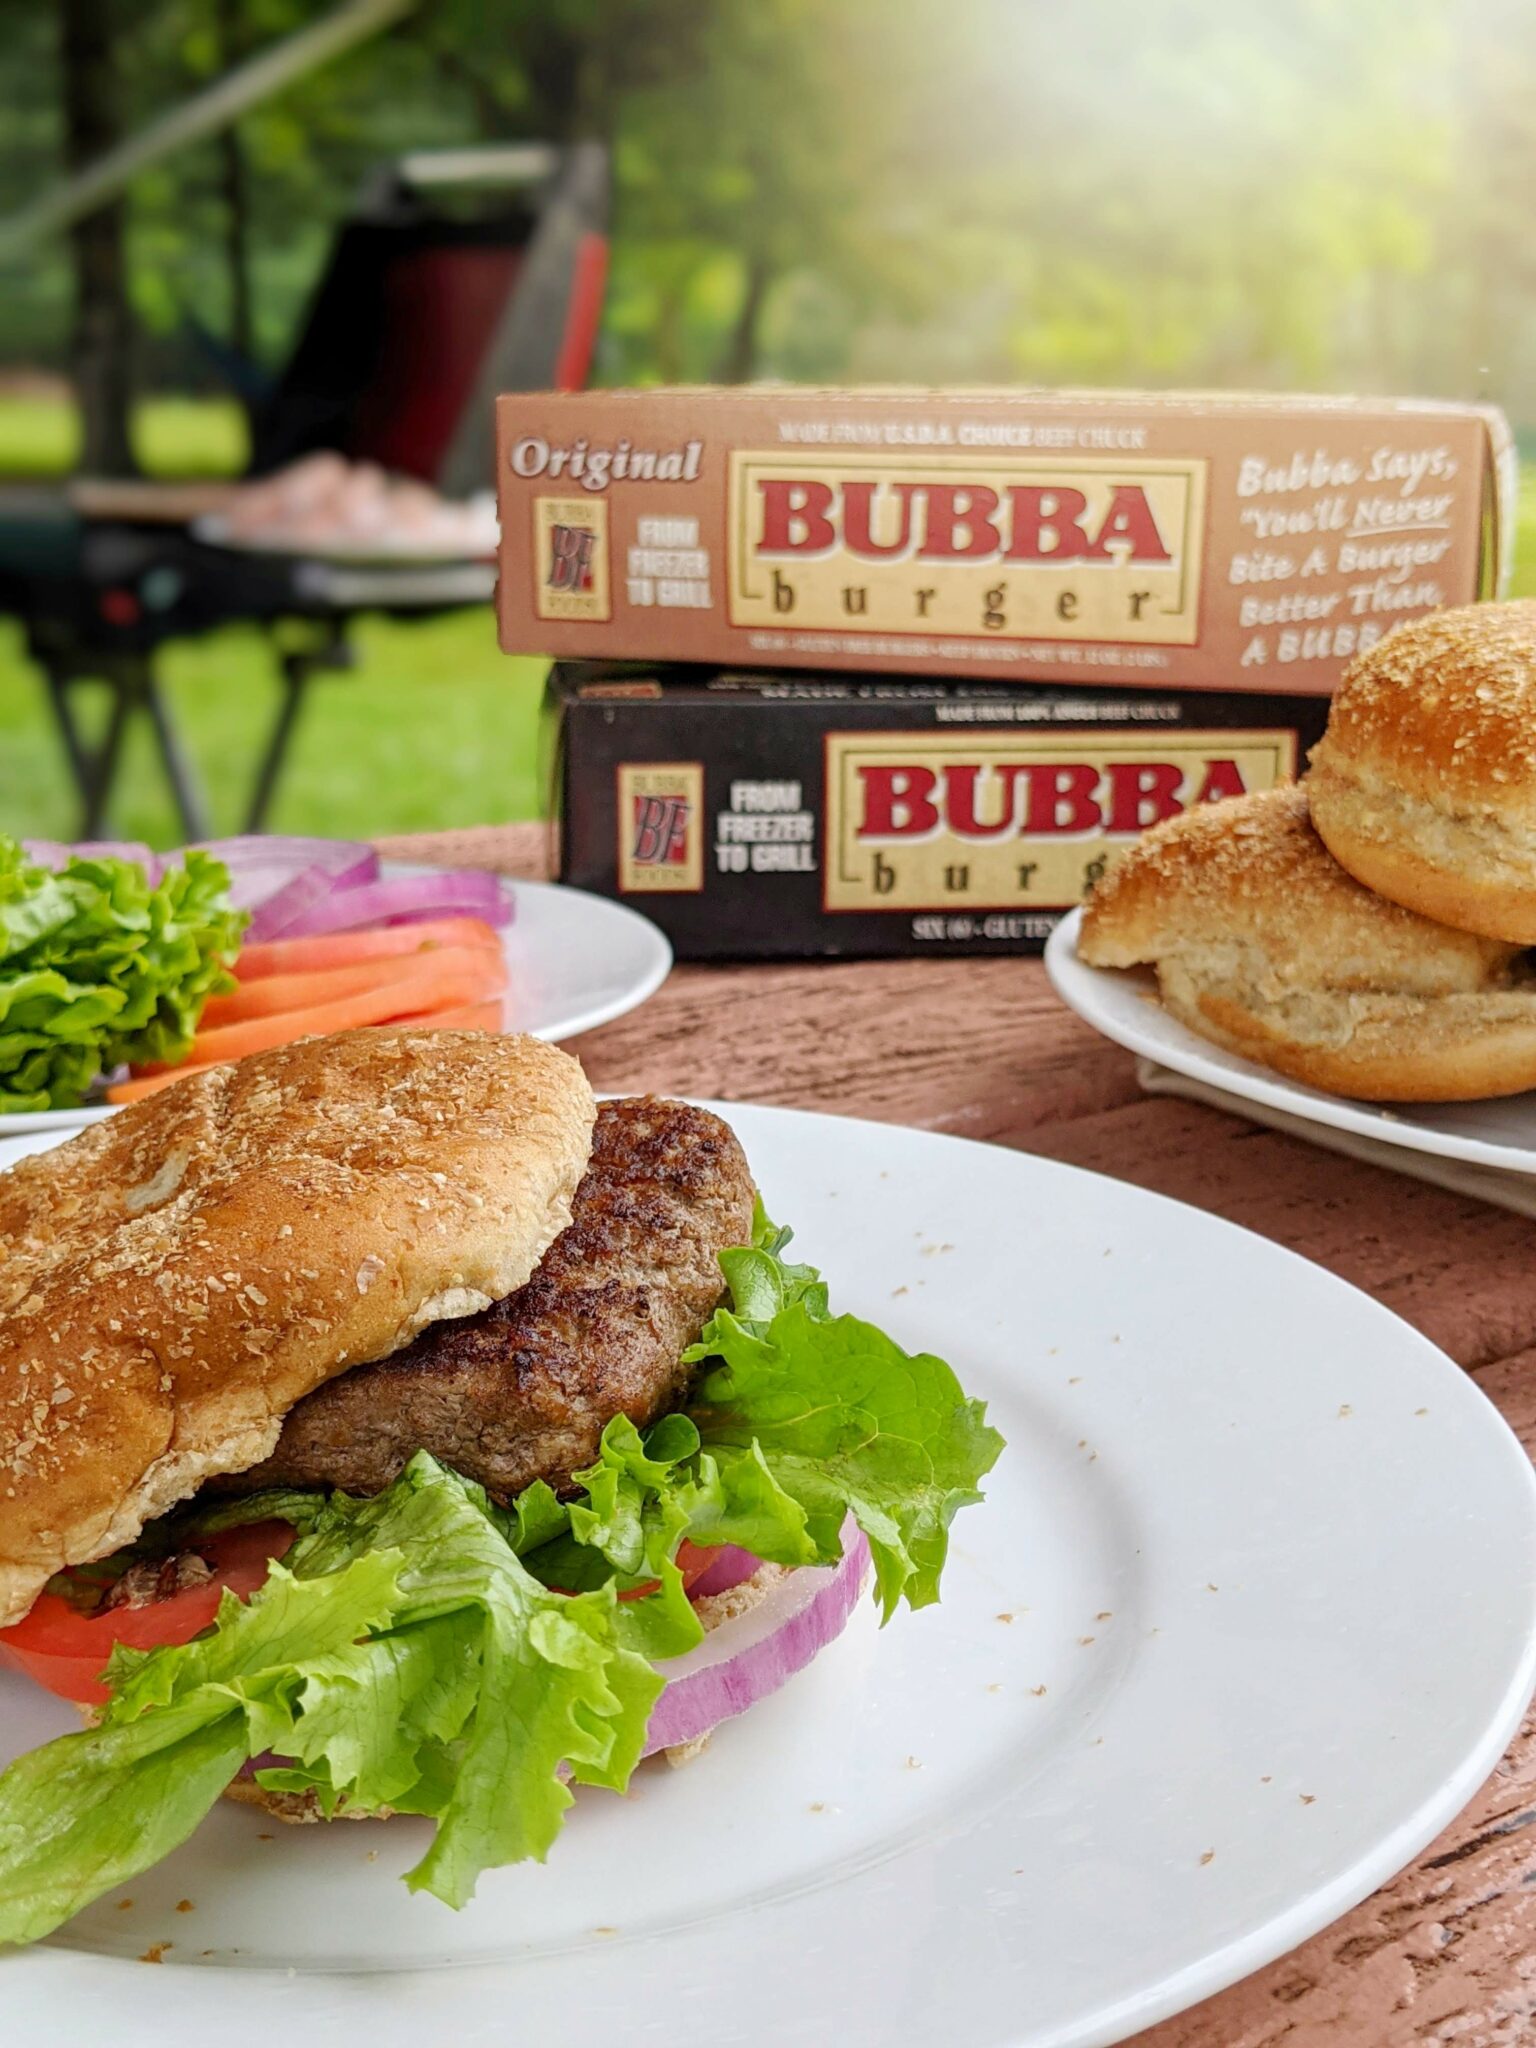 HOW TO GRILL FROZEN BUBBA BURGERS